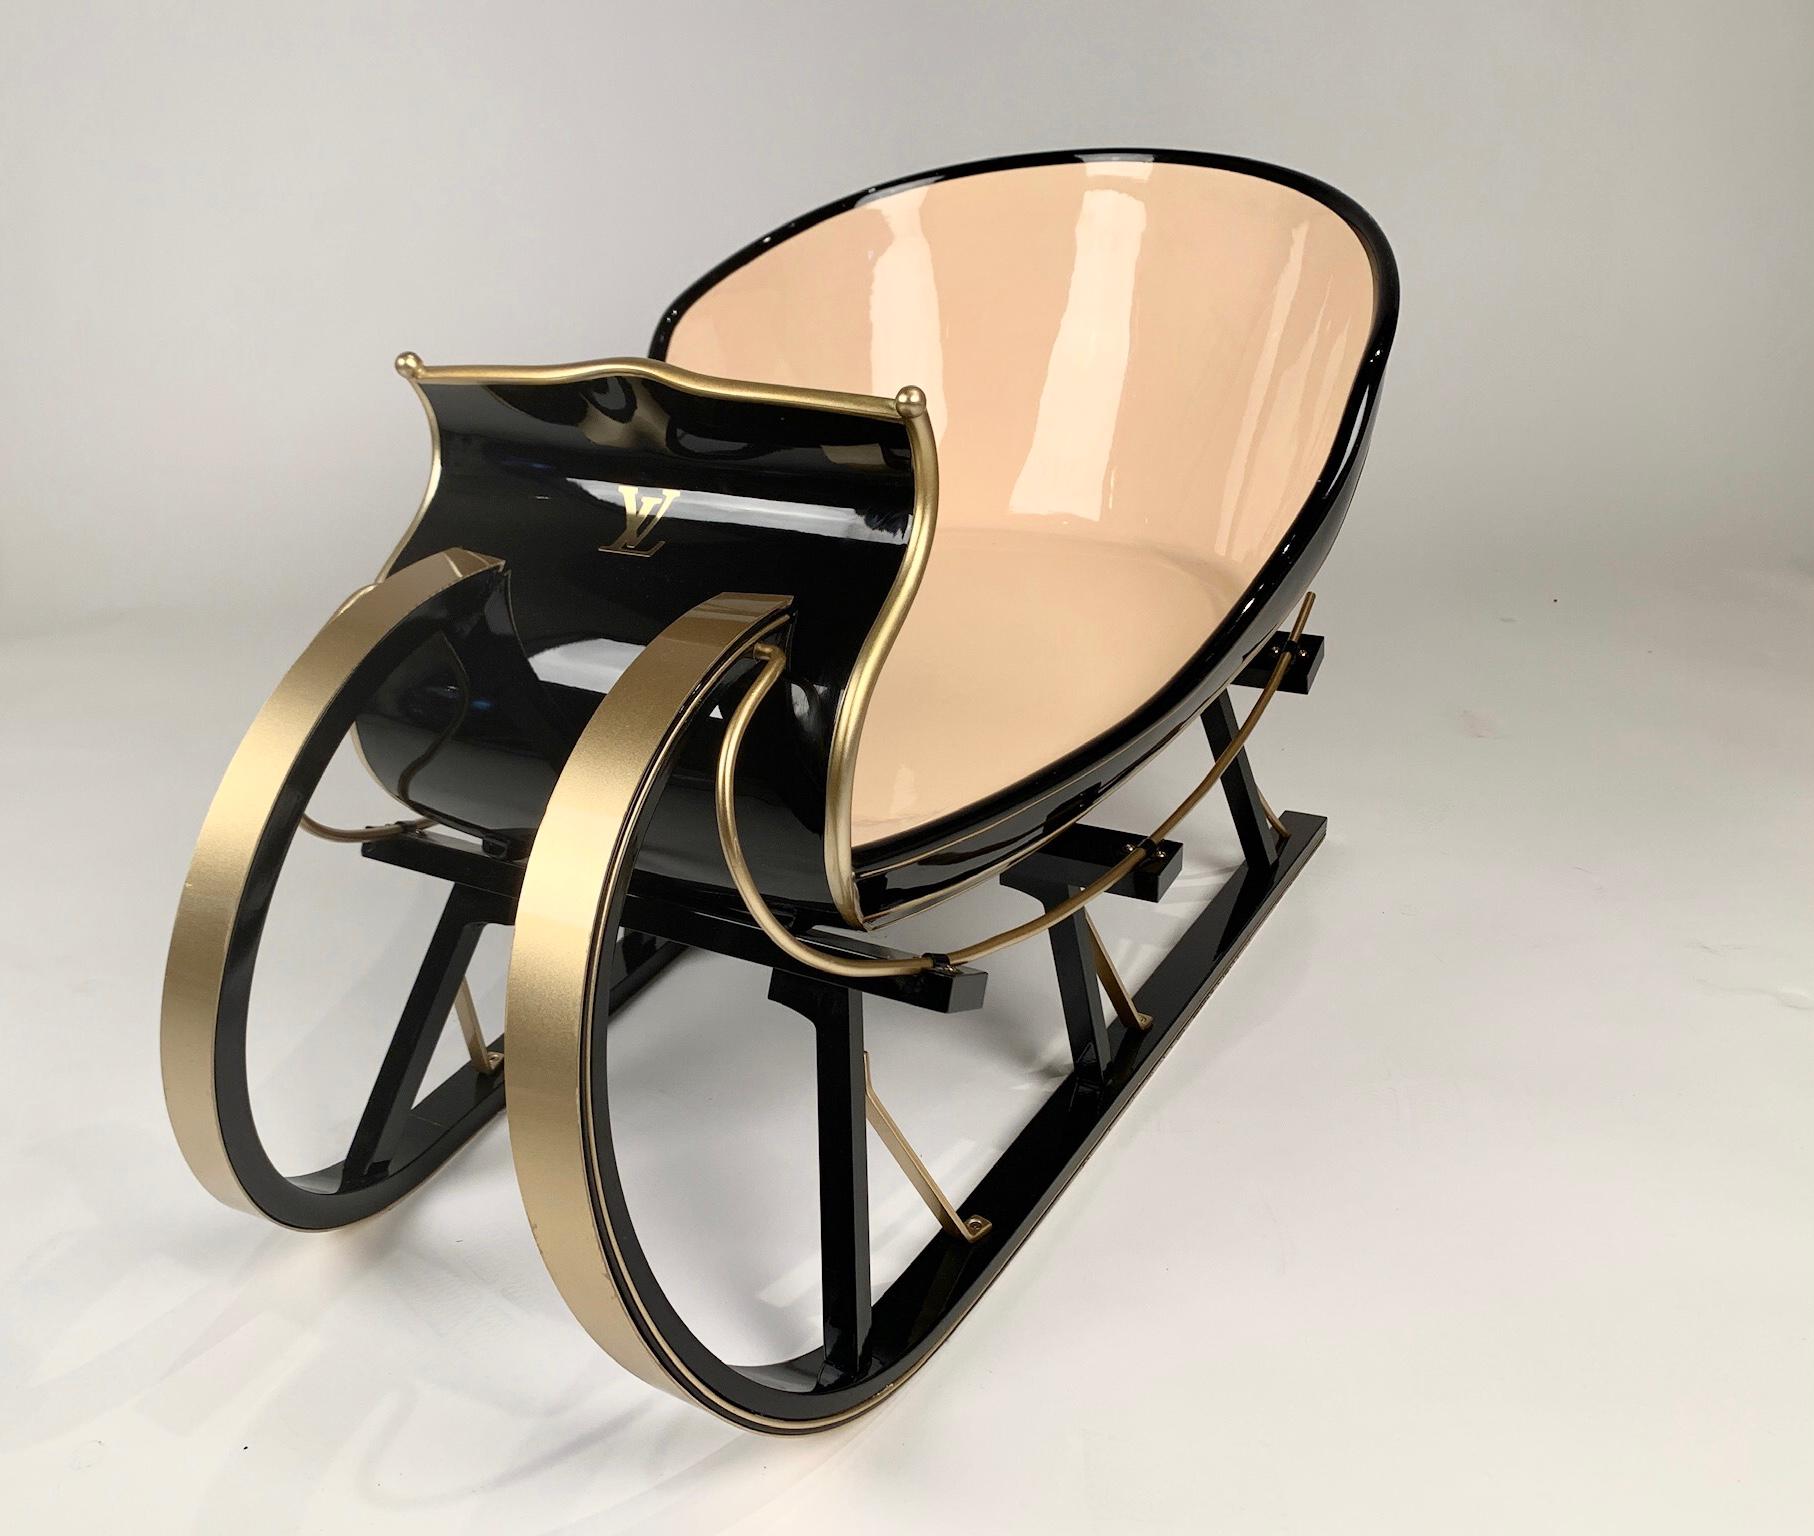 Beautiful and rare, Louis Vuitton sleigh commissioned for Louis Vuitton displays several years ago. There were only a few of these made by an artist in Norway and weren't for sale to the public. The sleigh is meticulously crafted and finished with a